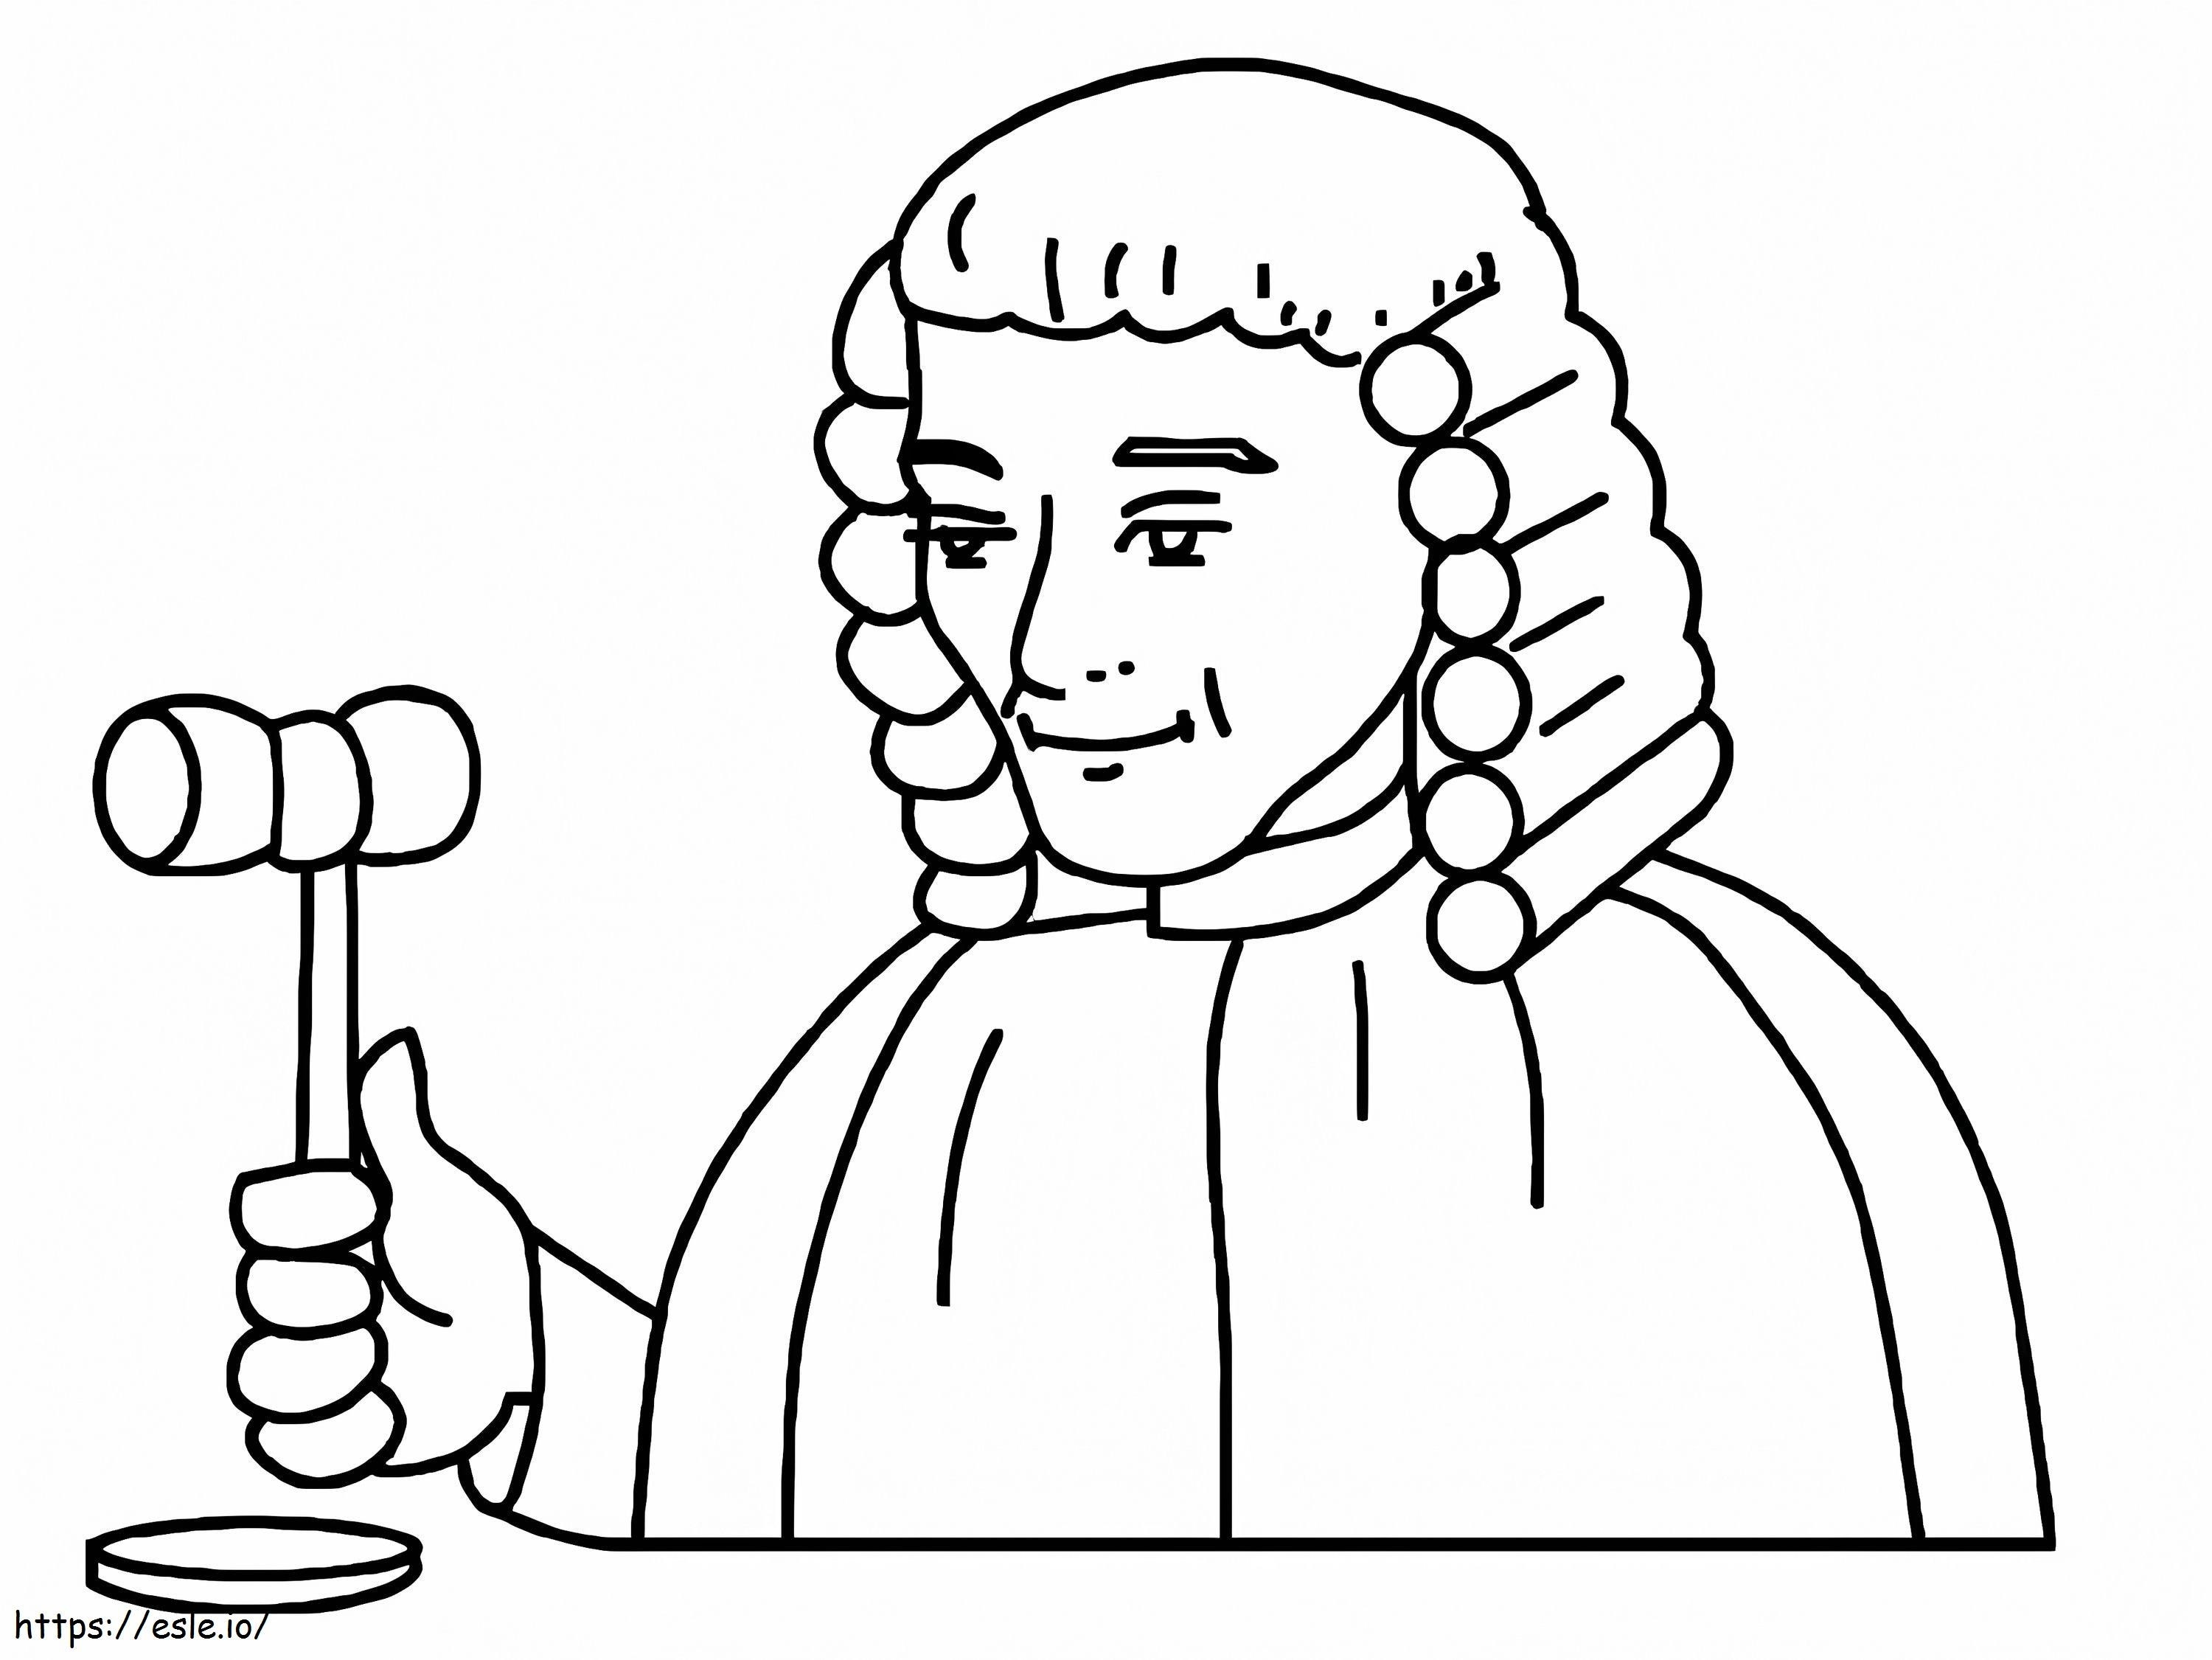 Judge Is Smiling coloring page